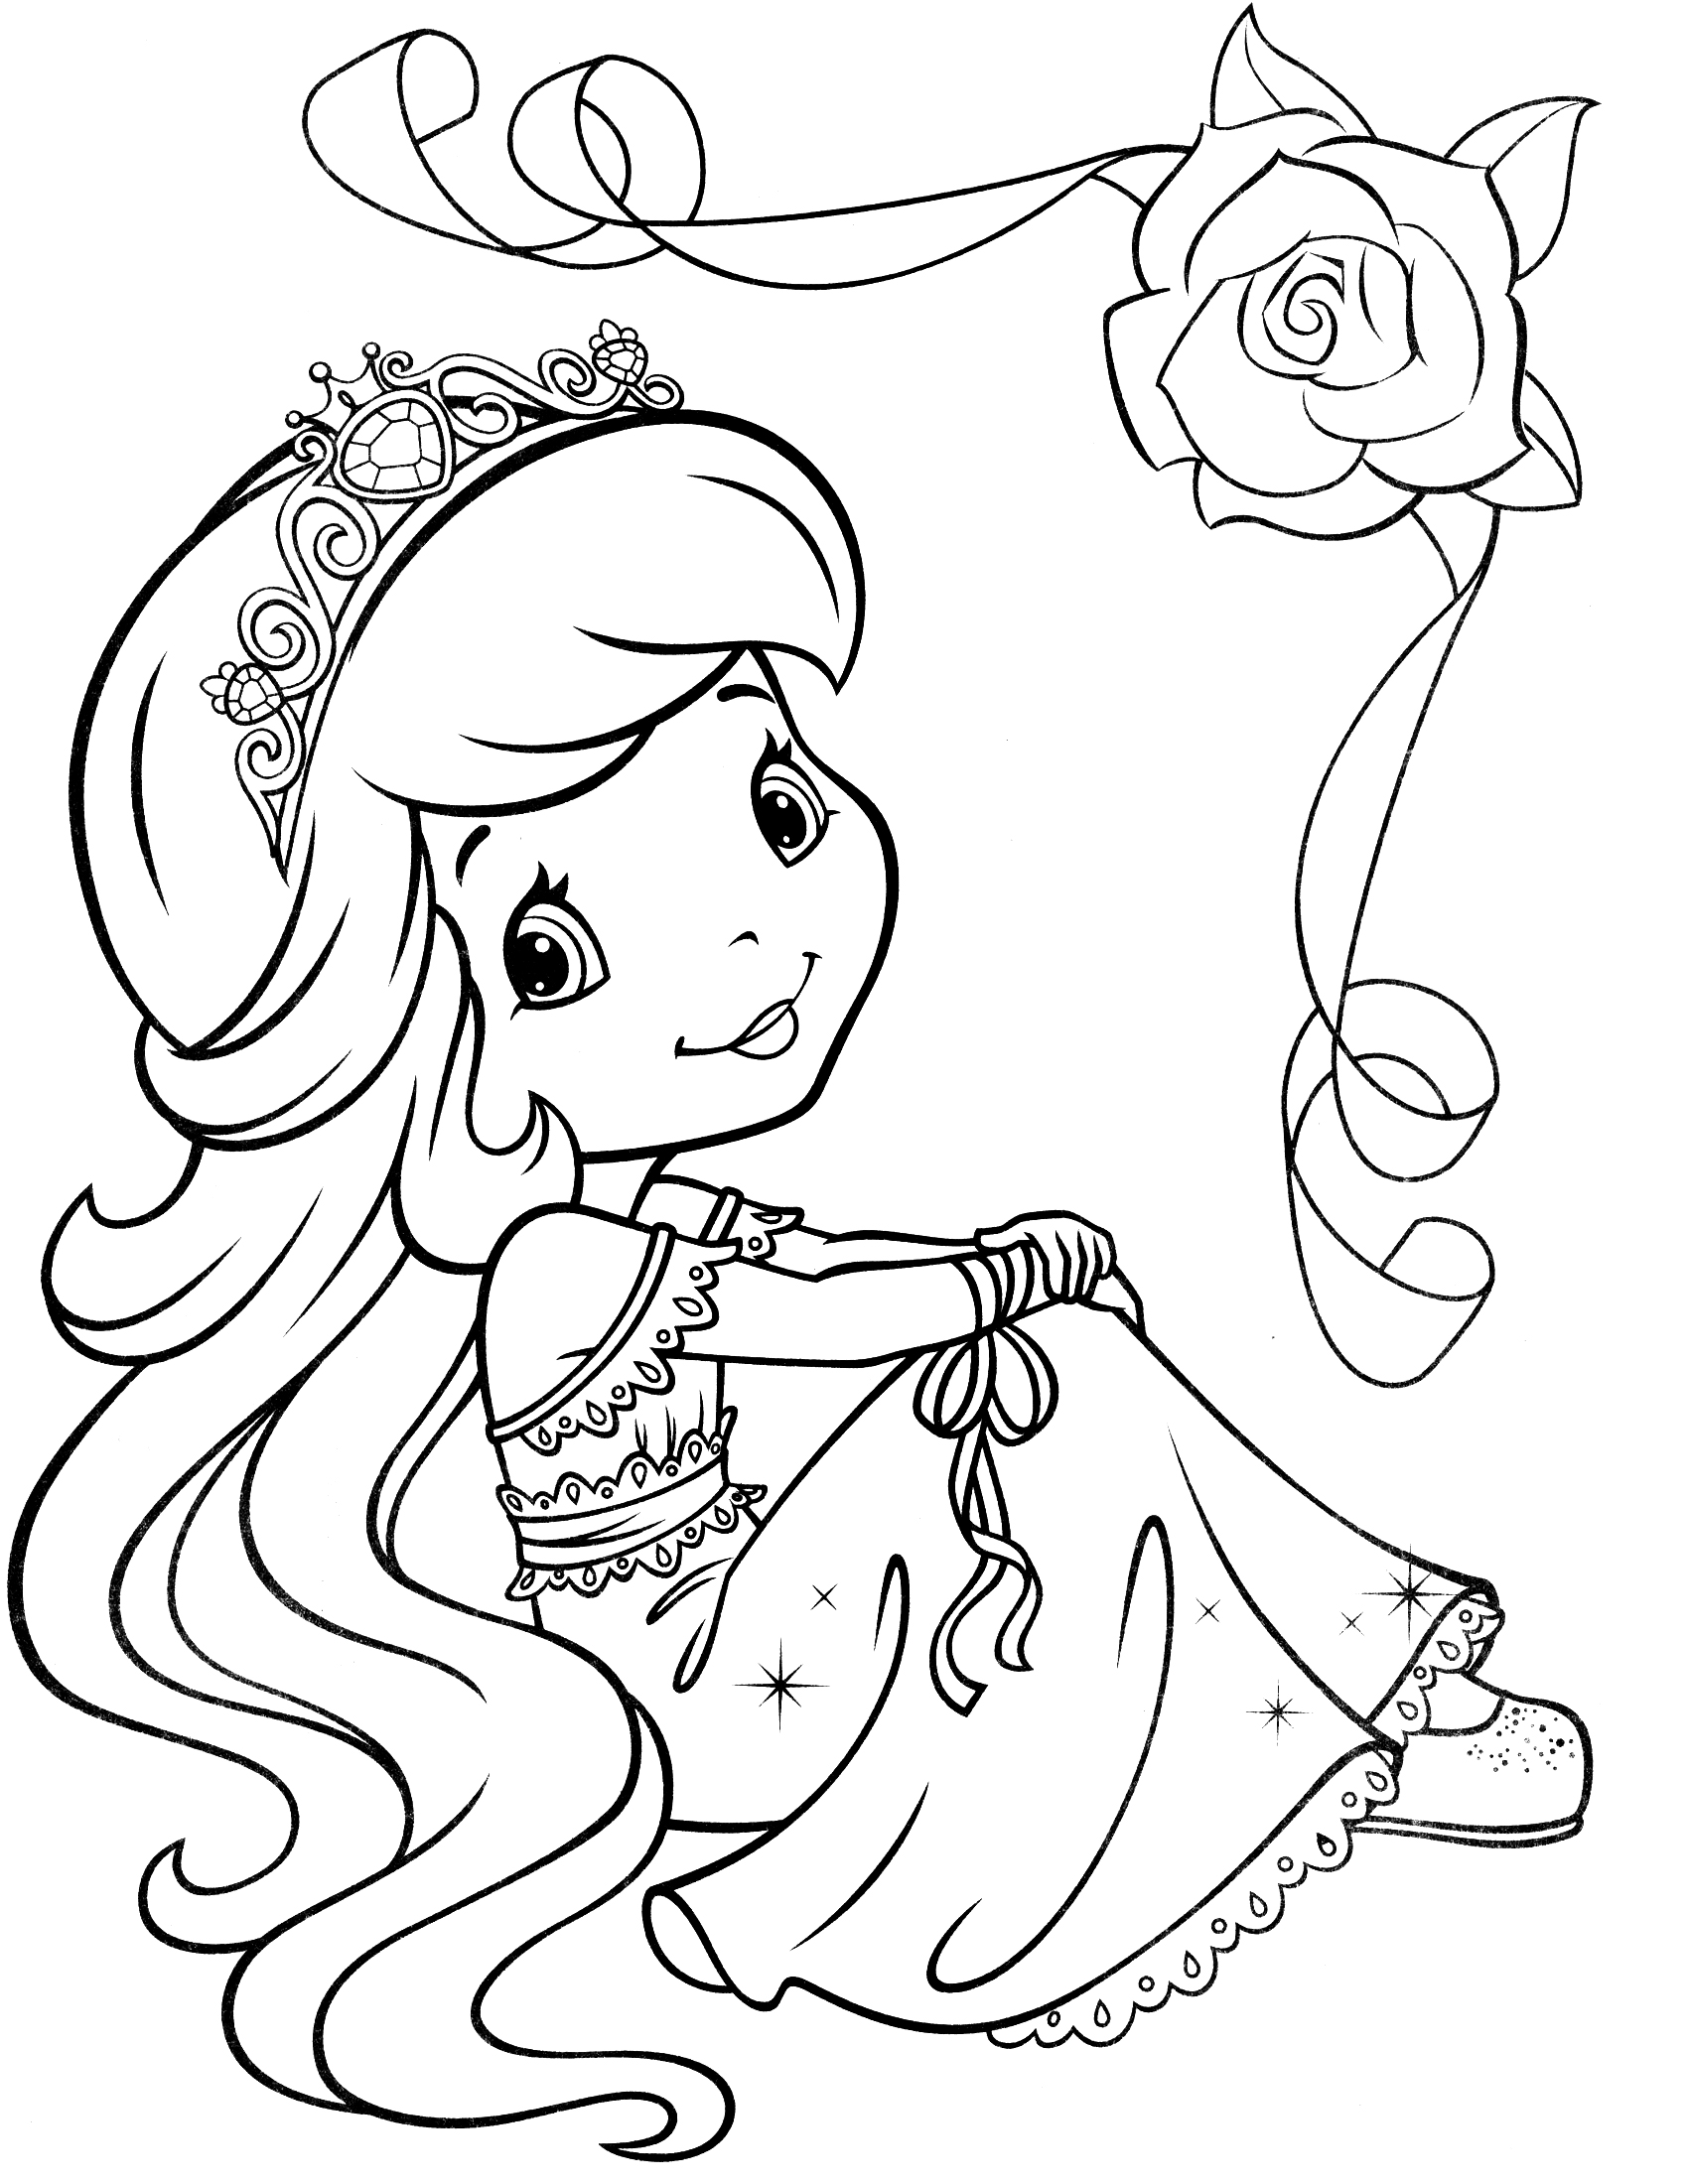  Strawberry Shortcake Coloring Pages / Cool coloring pages / 19